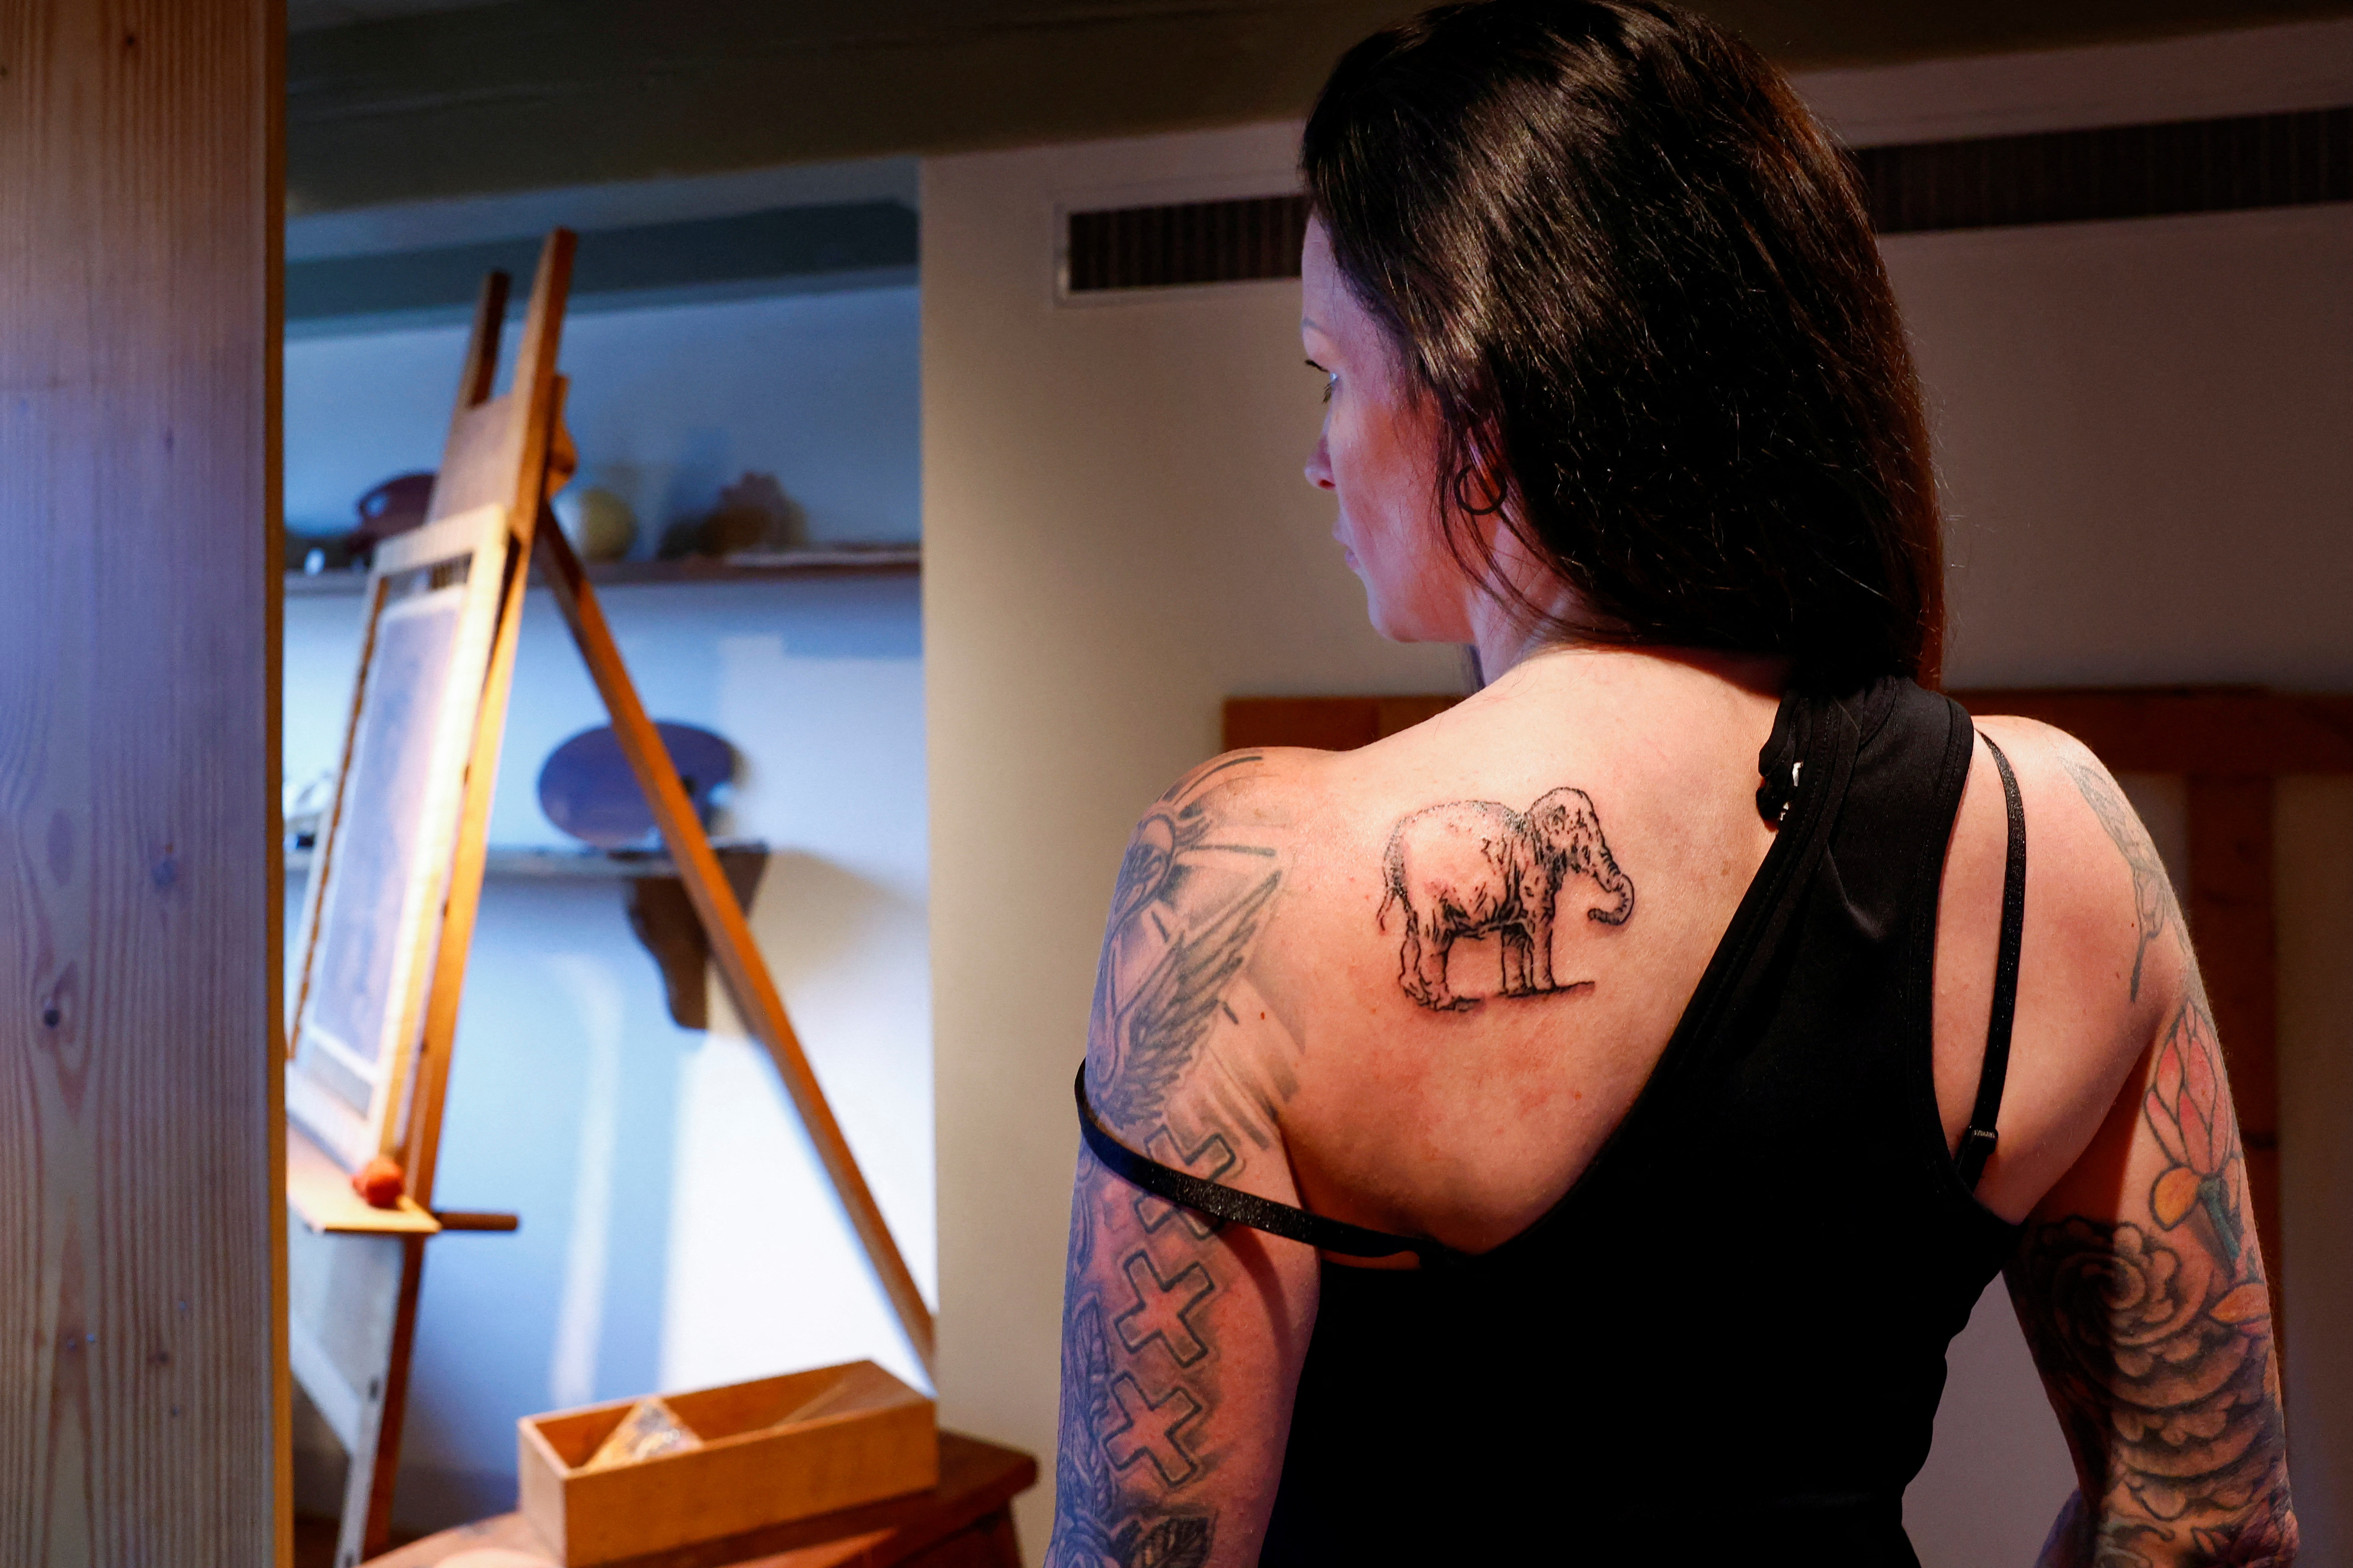 Visit a museum, go home inked - pop-up tattoo parlour at Dutch Rembrandt House